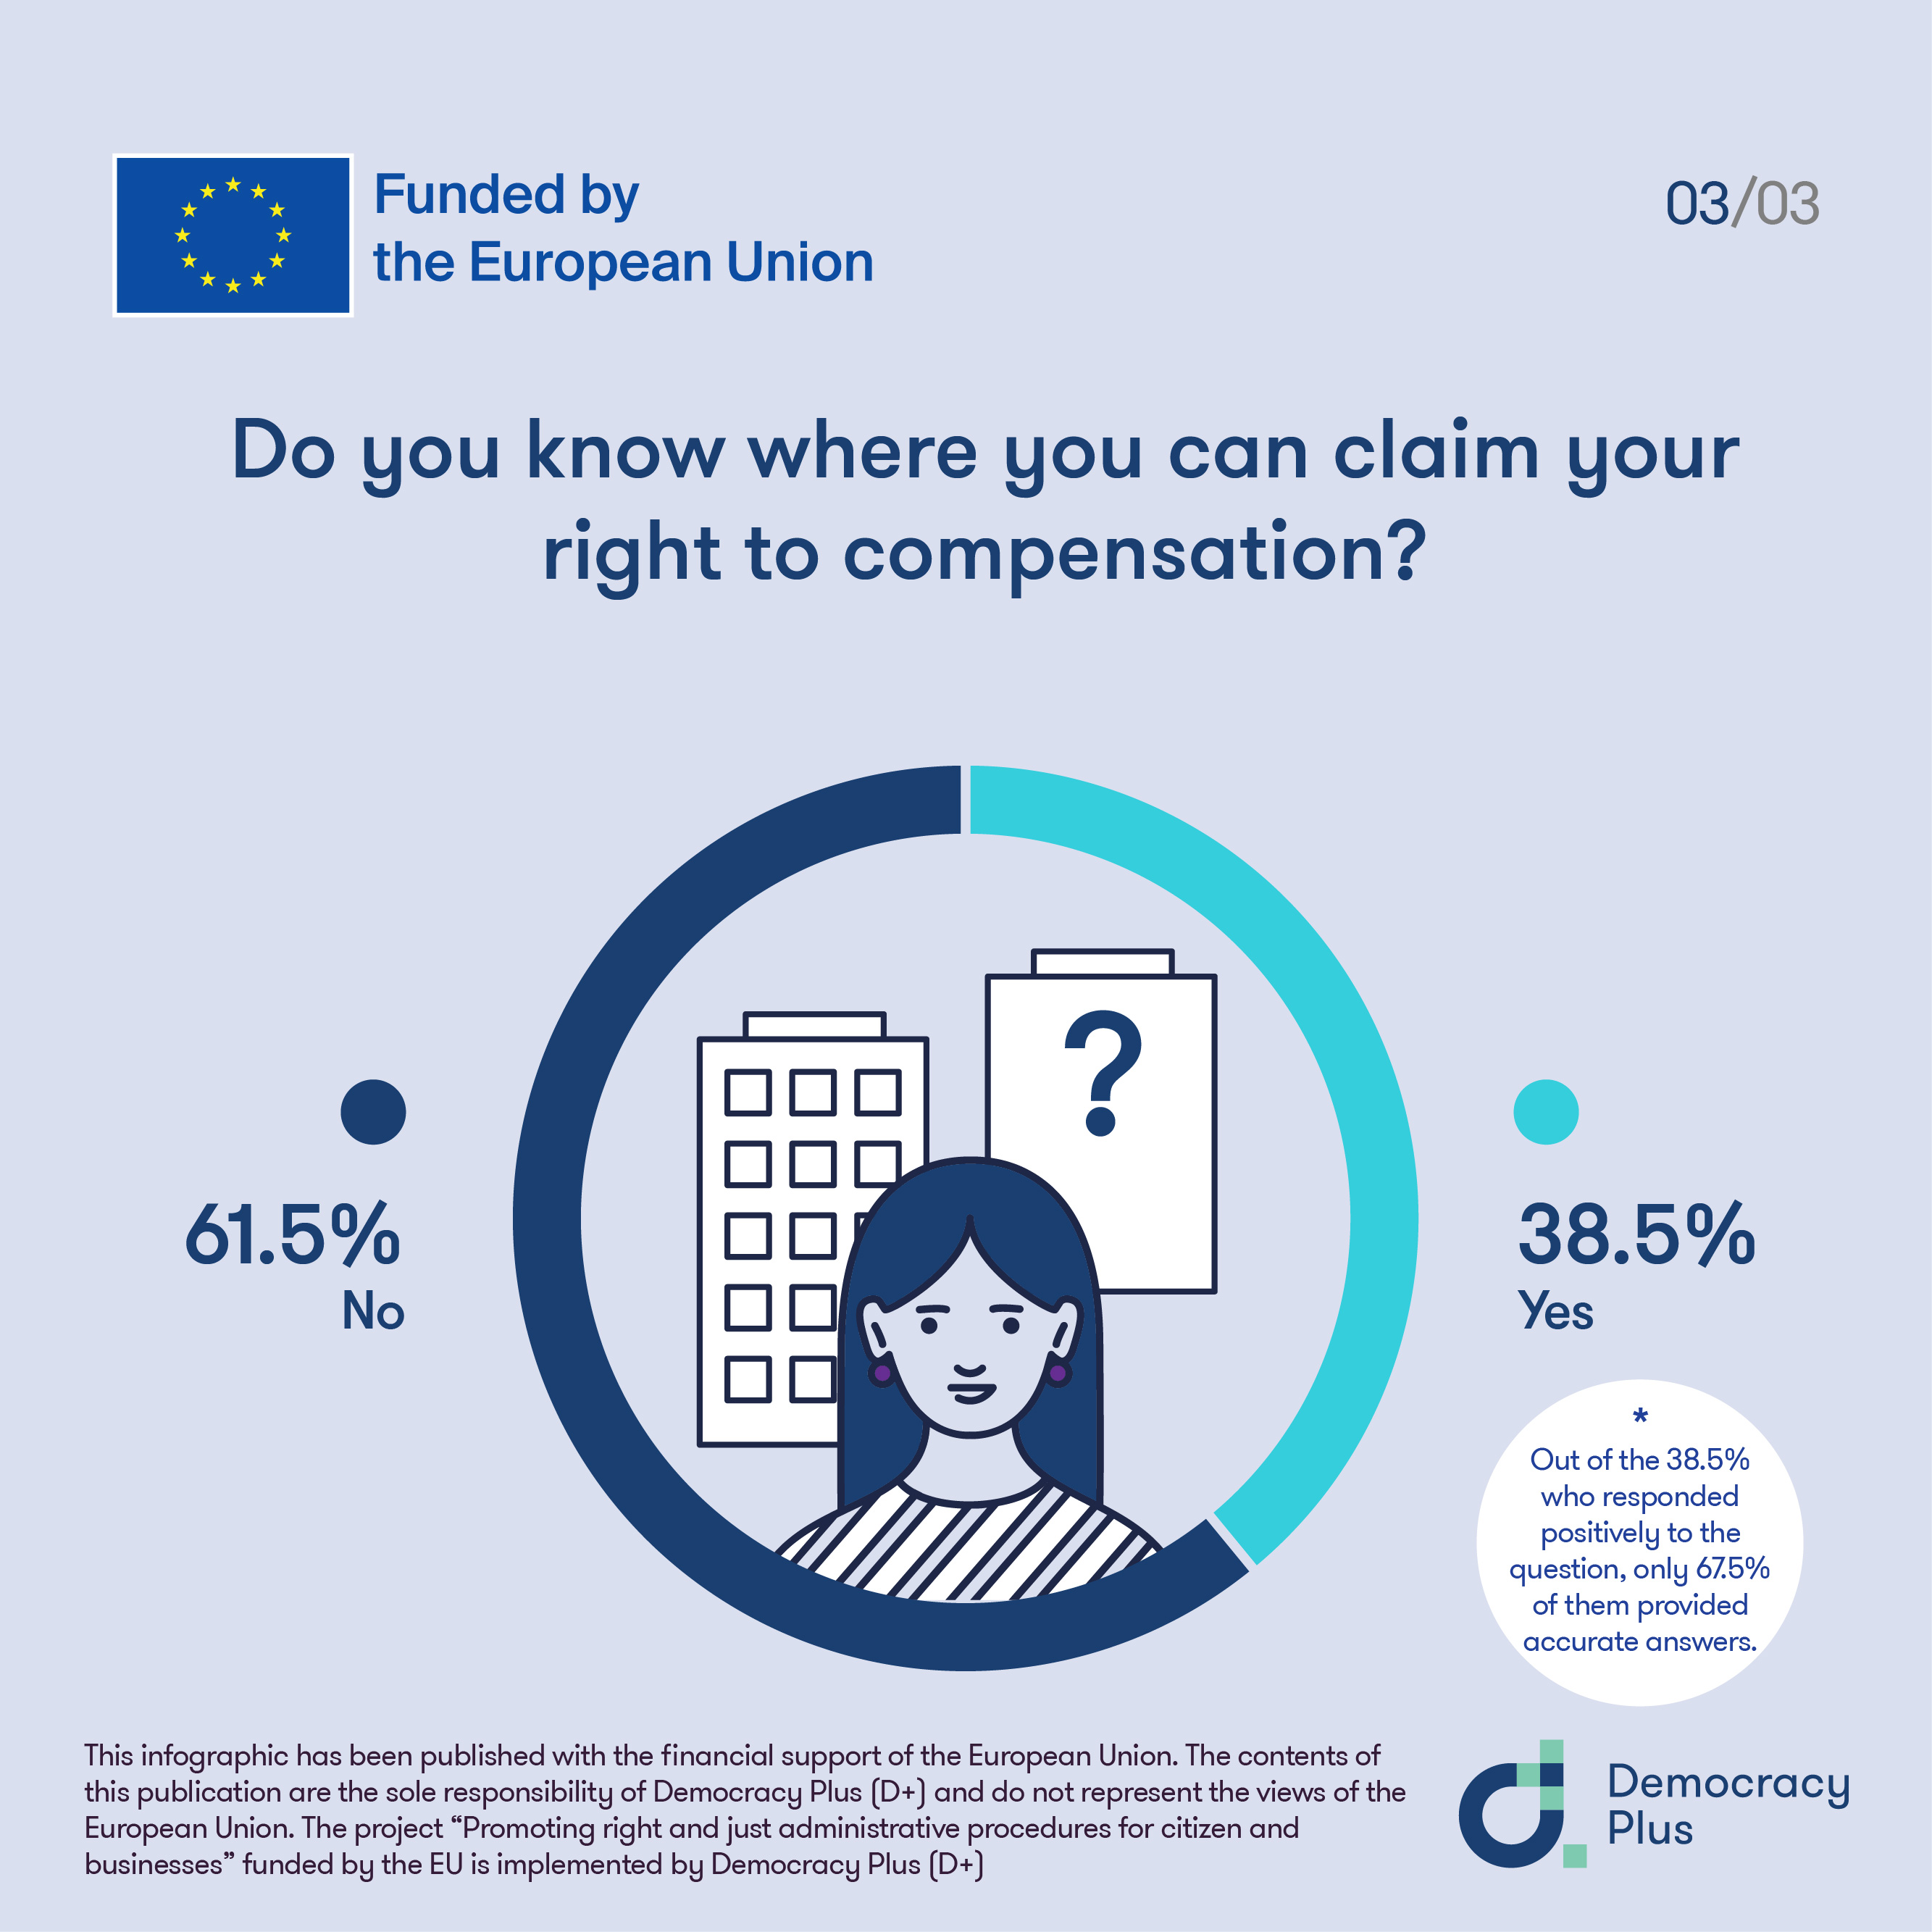 Survey with citizens 3/3: Do you know where you can claim your right to compensation